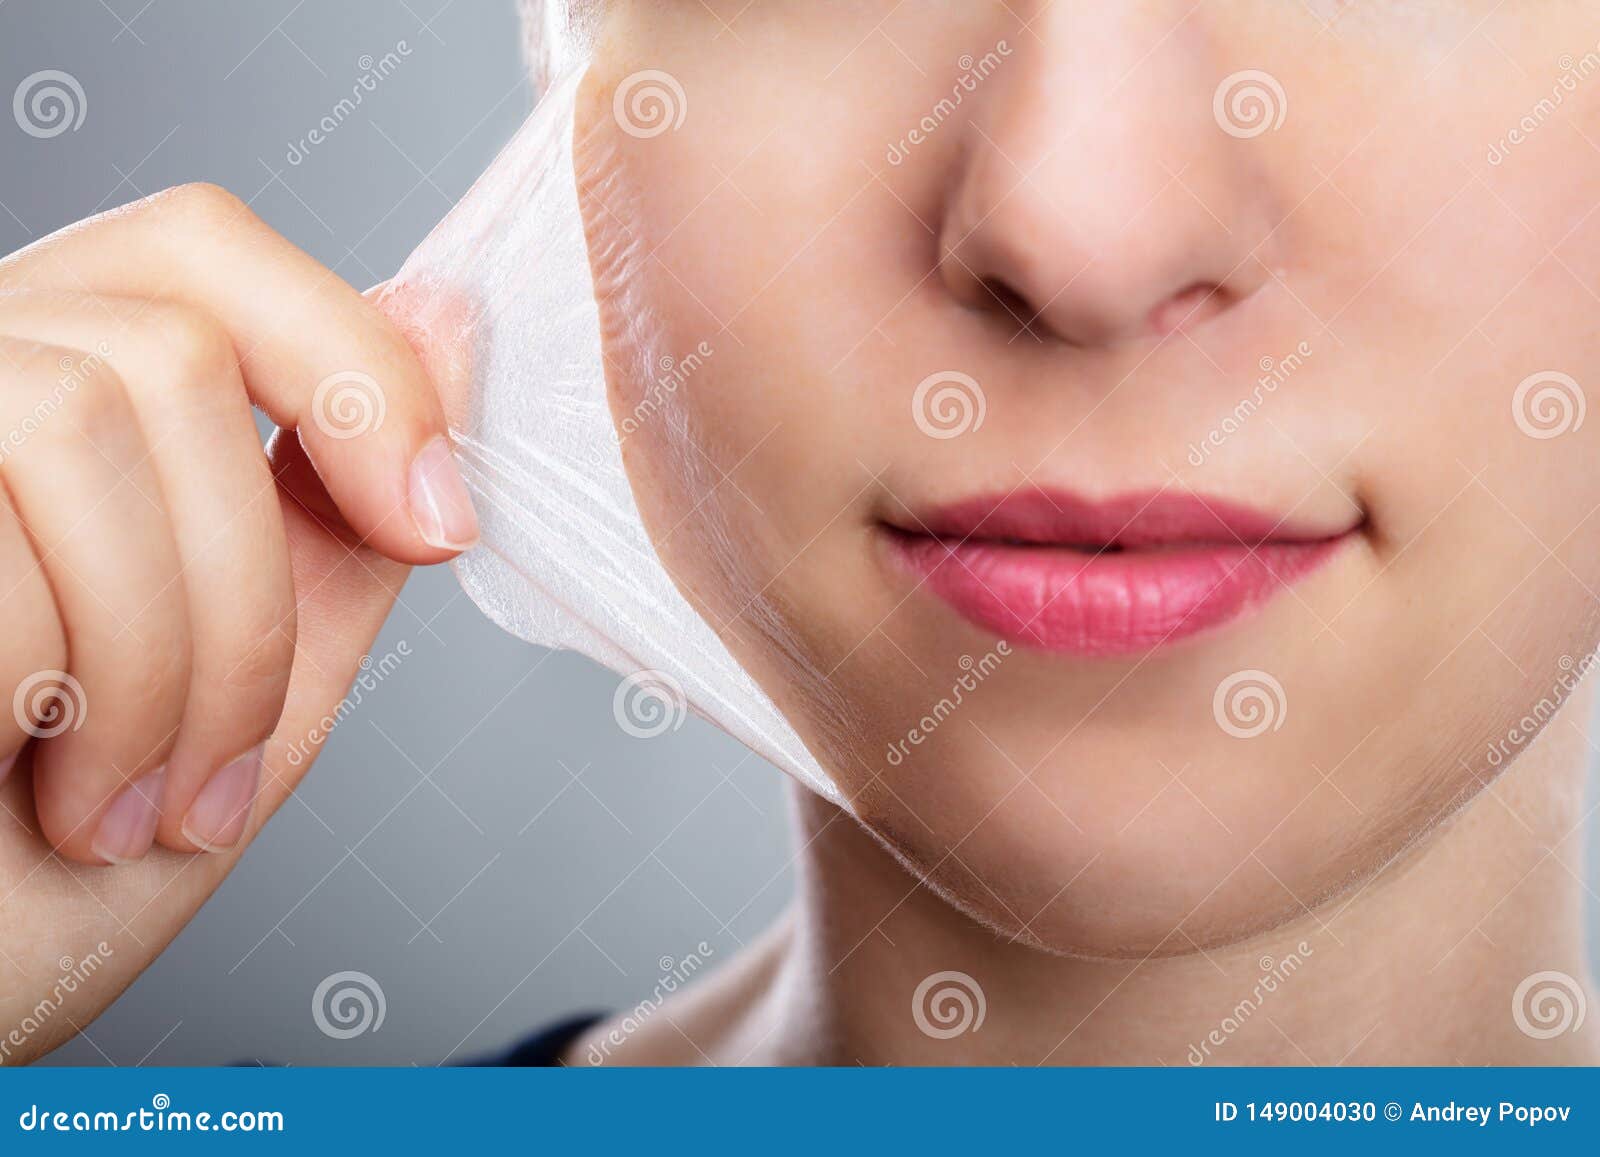 woman removing peeling mask from her face